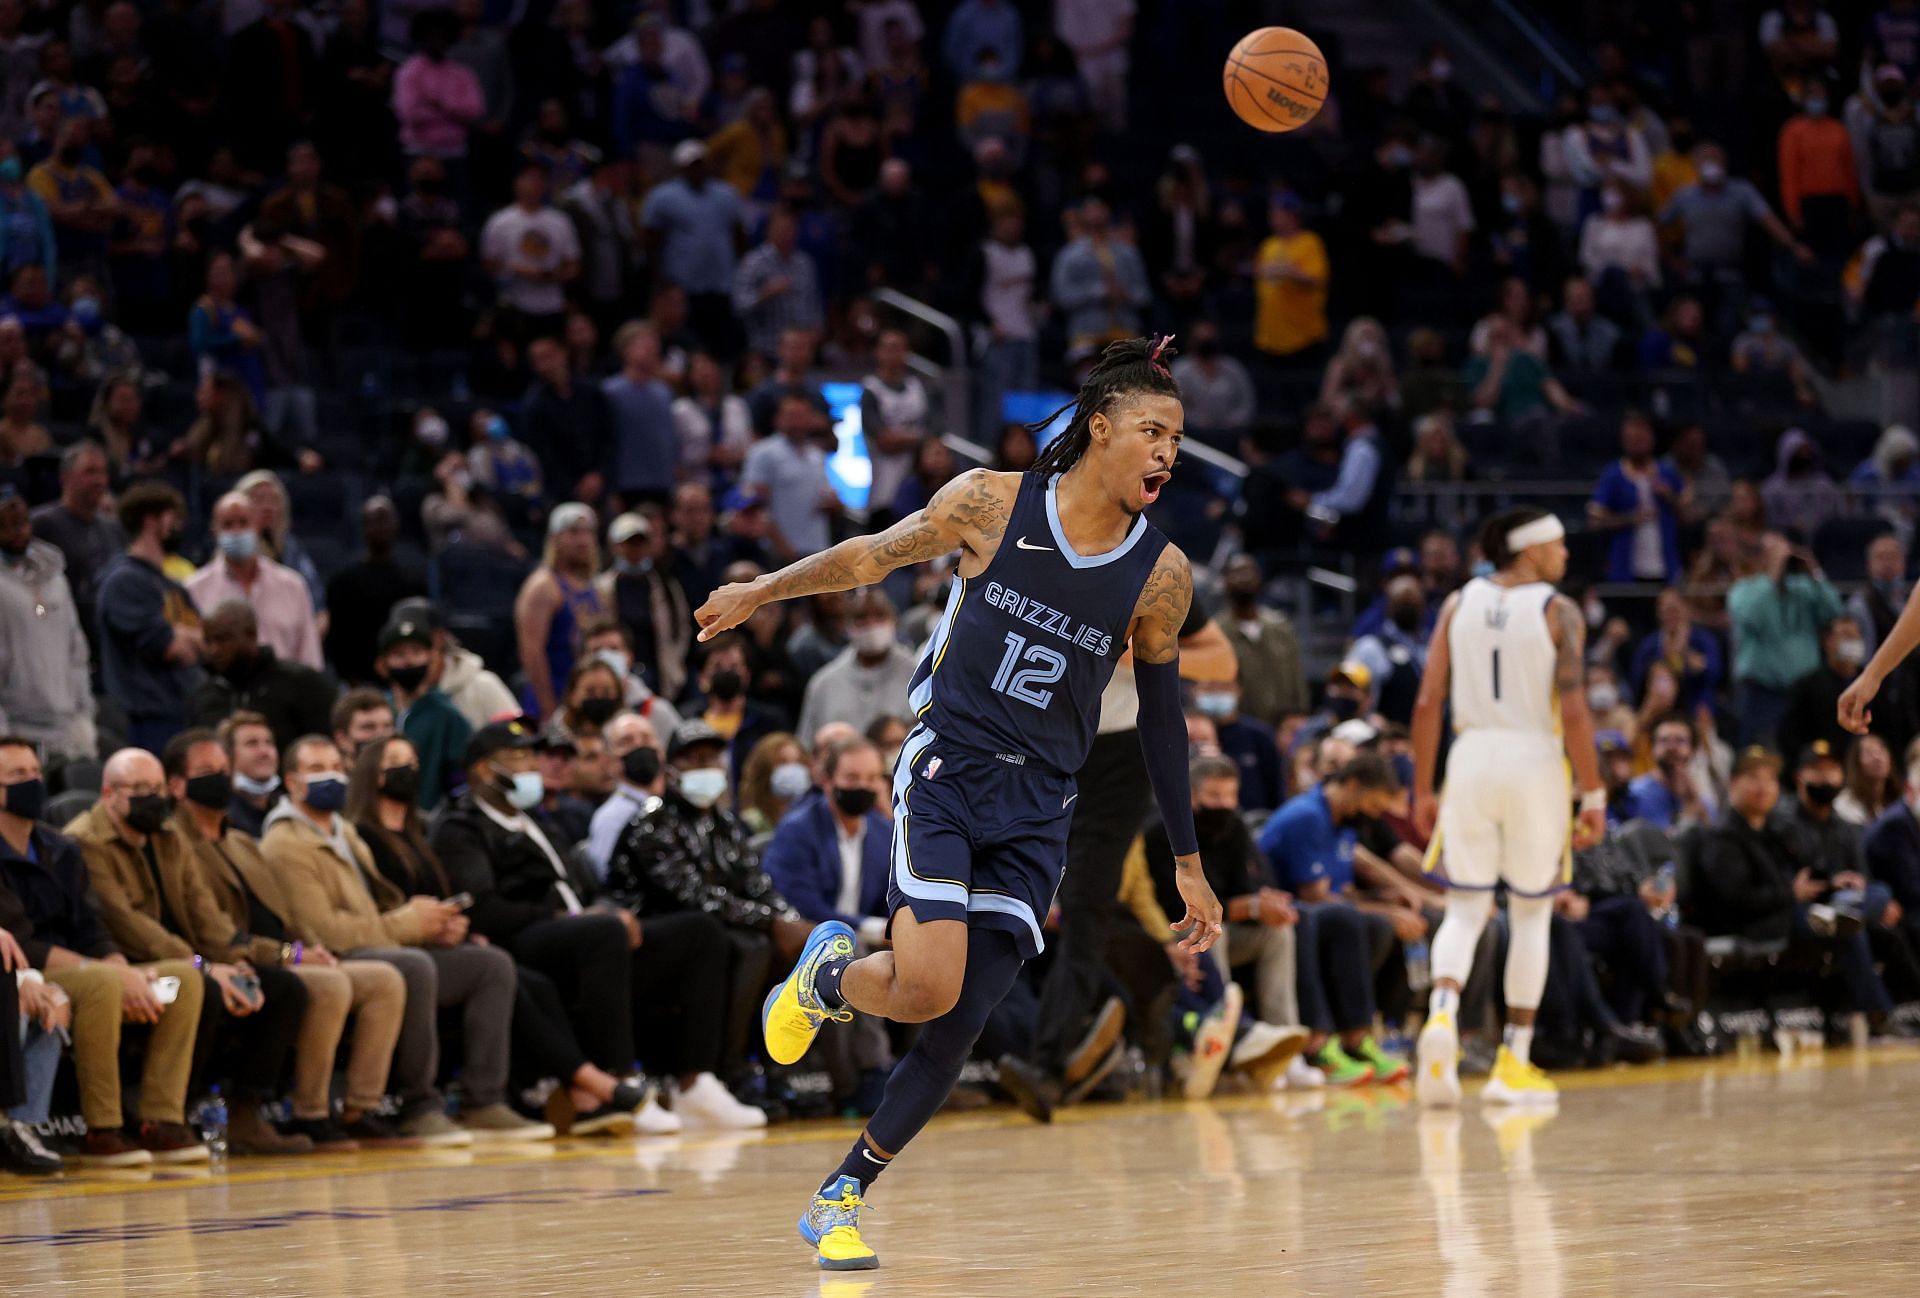 Memphis Grizzlies handed the Golden State Warriors their first loss of the 2021-22 season.